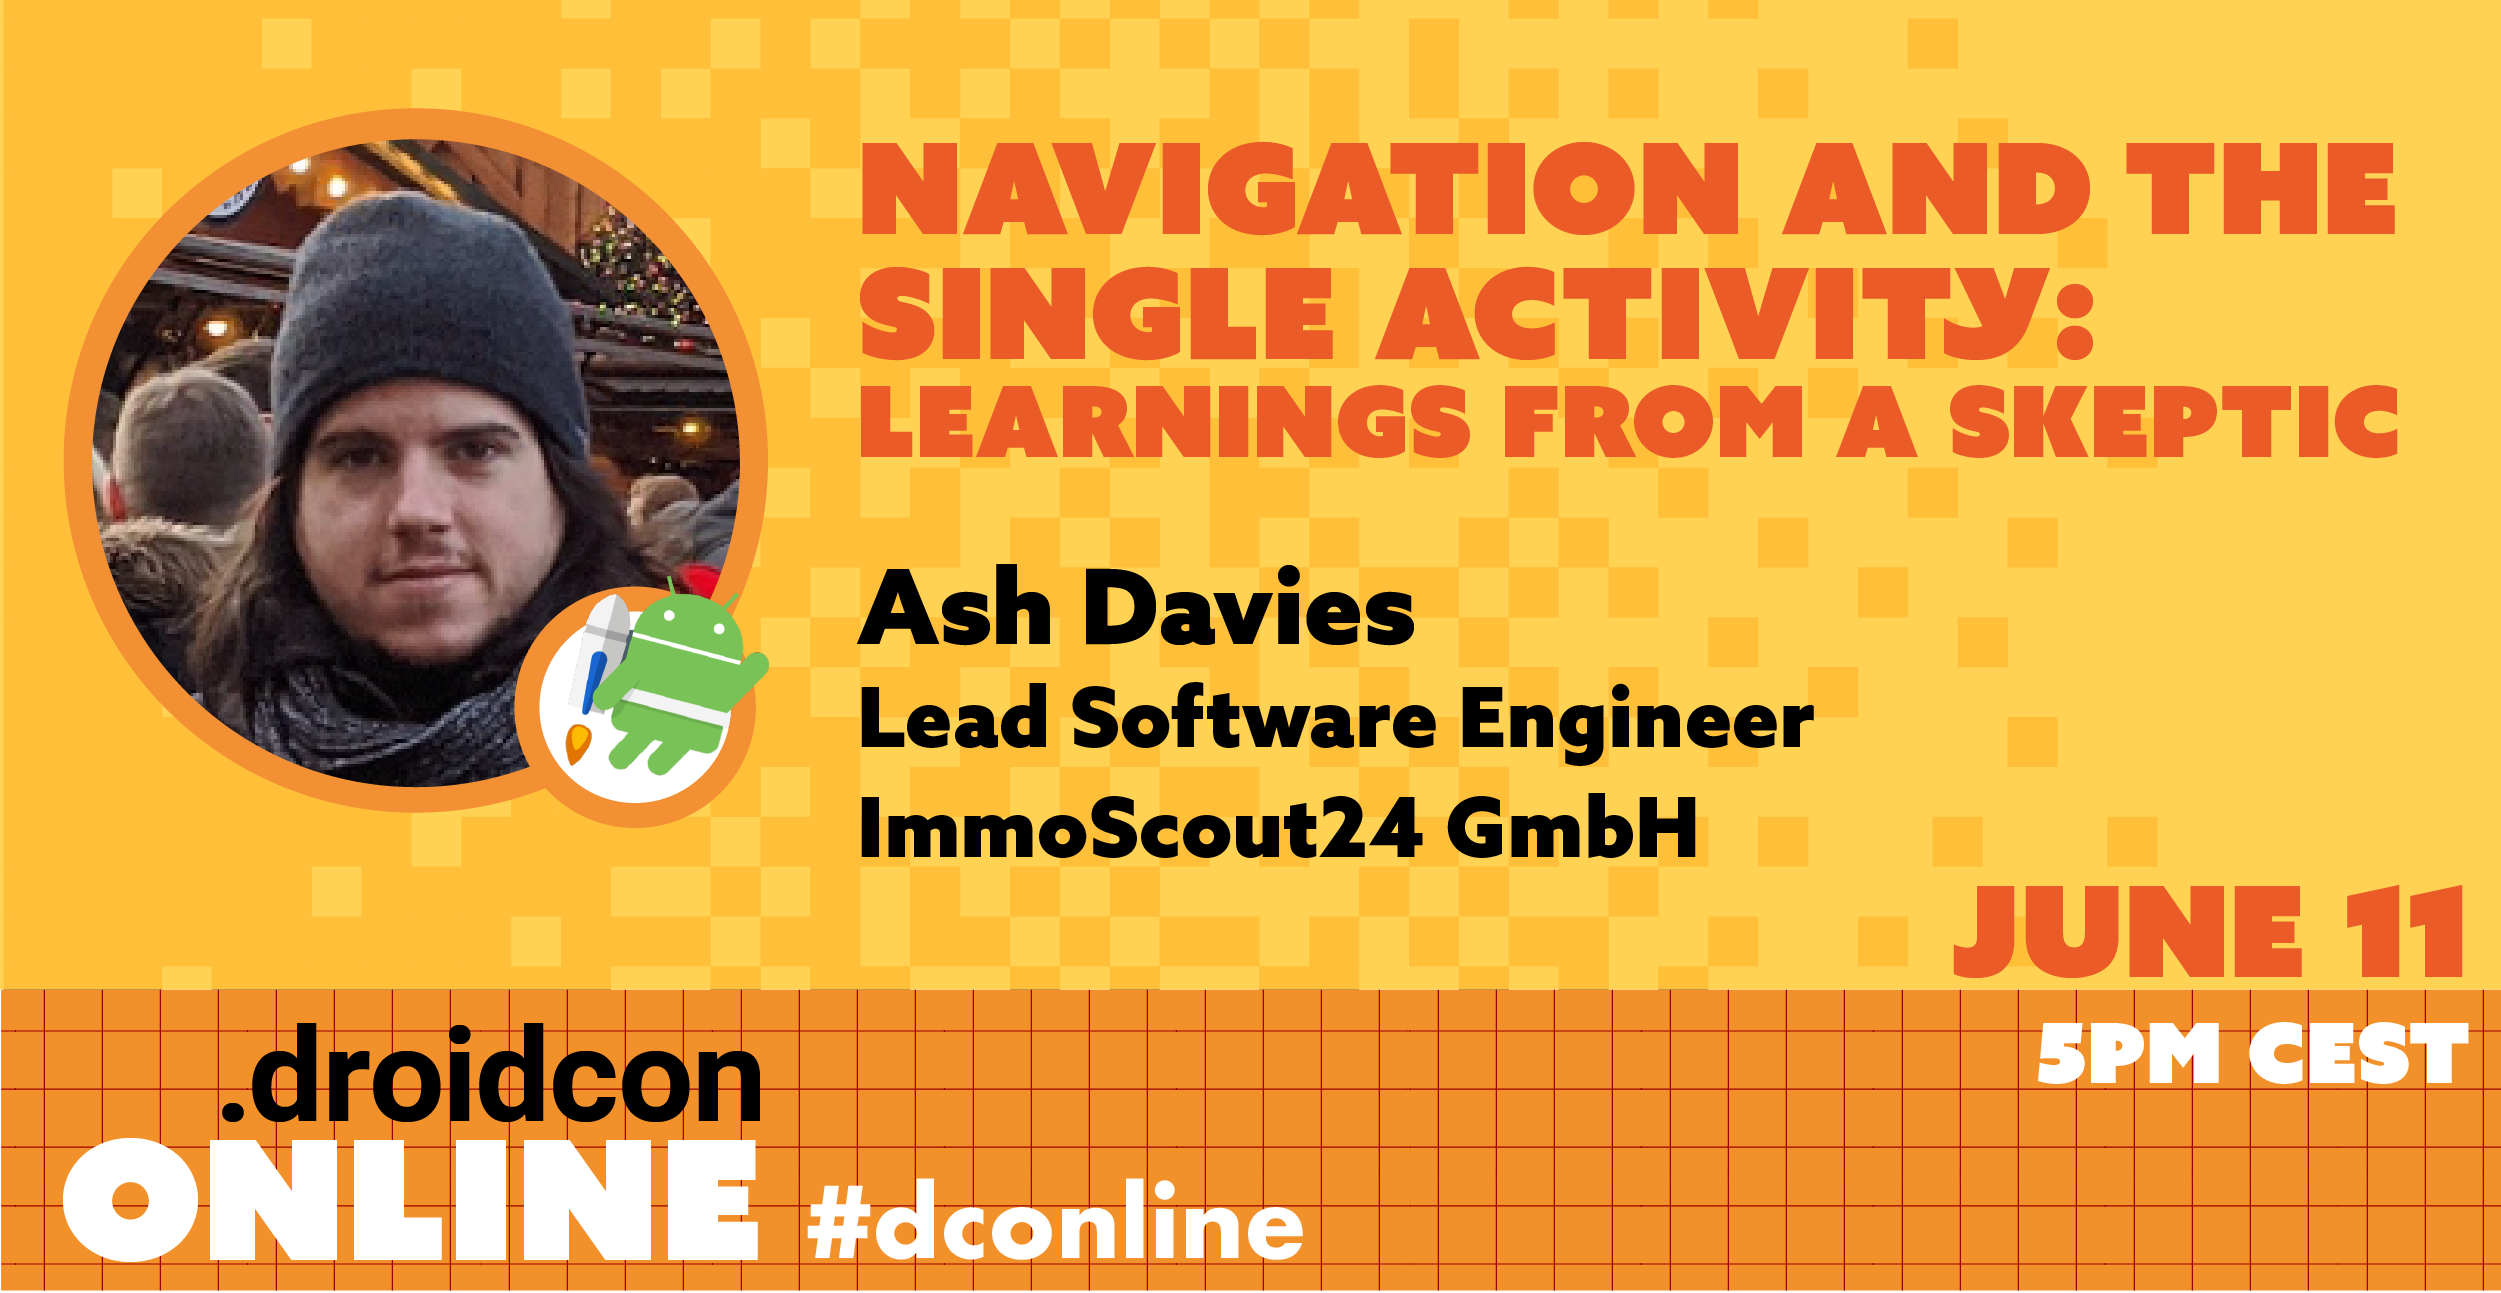 droidcon Online: Navigation and the Single Activity